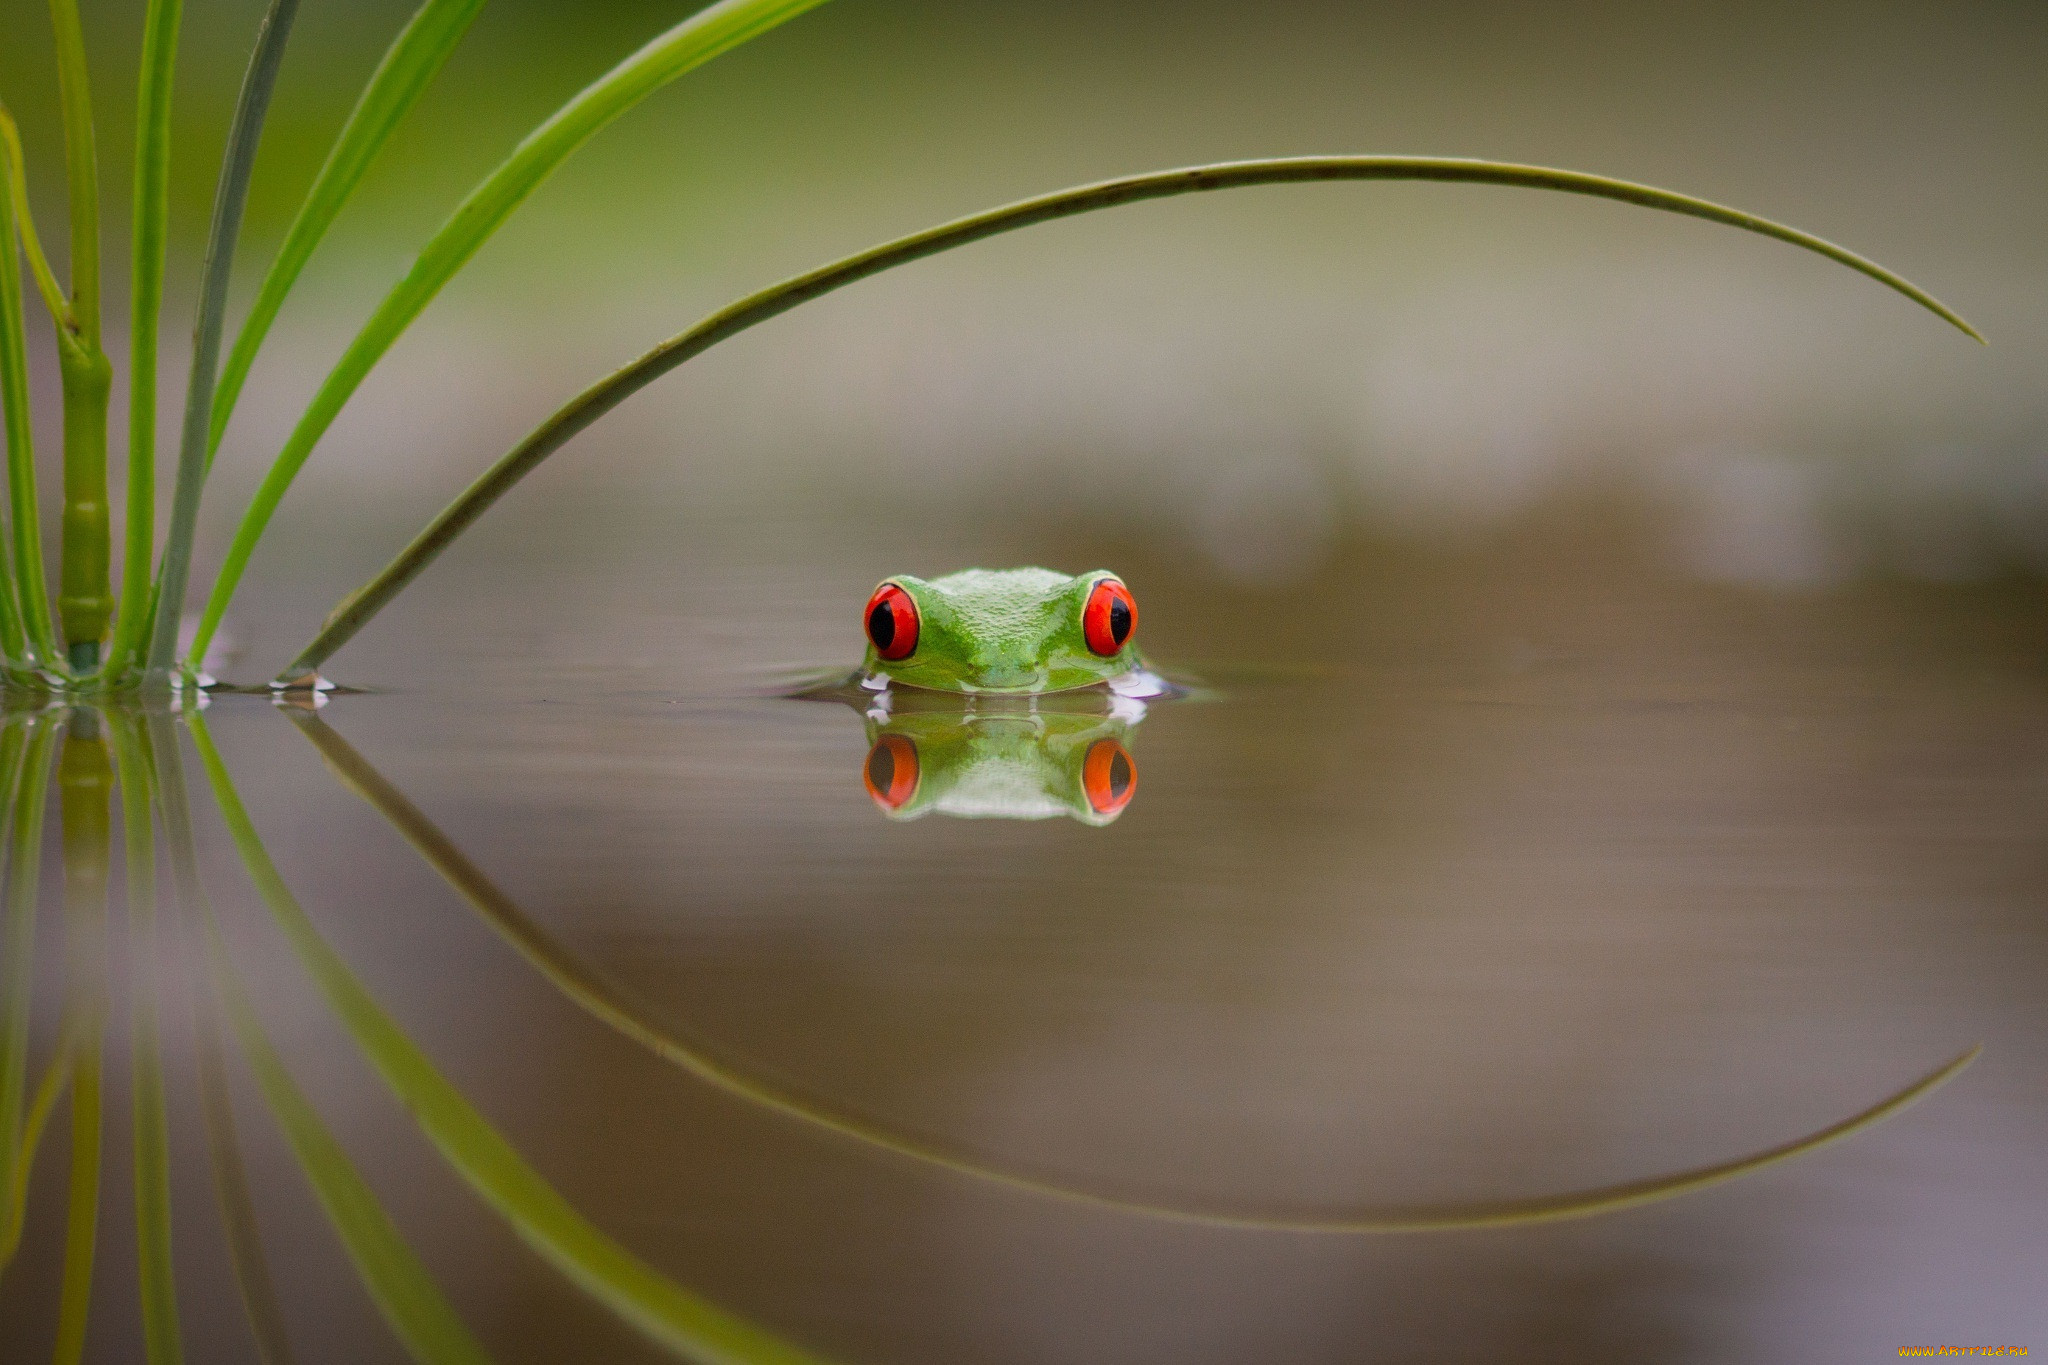 , , , , , leave, , beauty, , , frog, , red, eyes, colourfull, , , swimming, , , lake, water